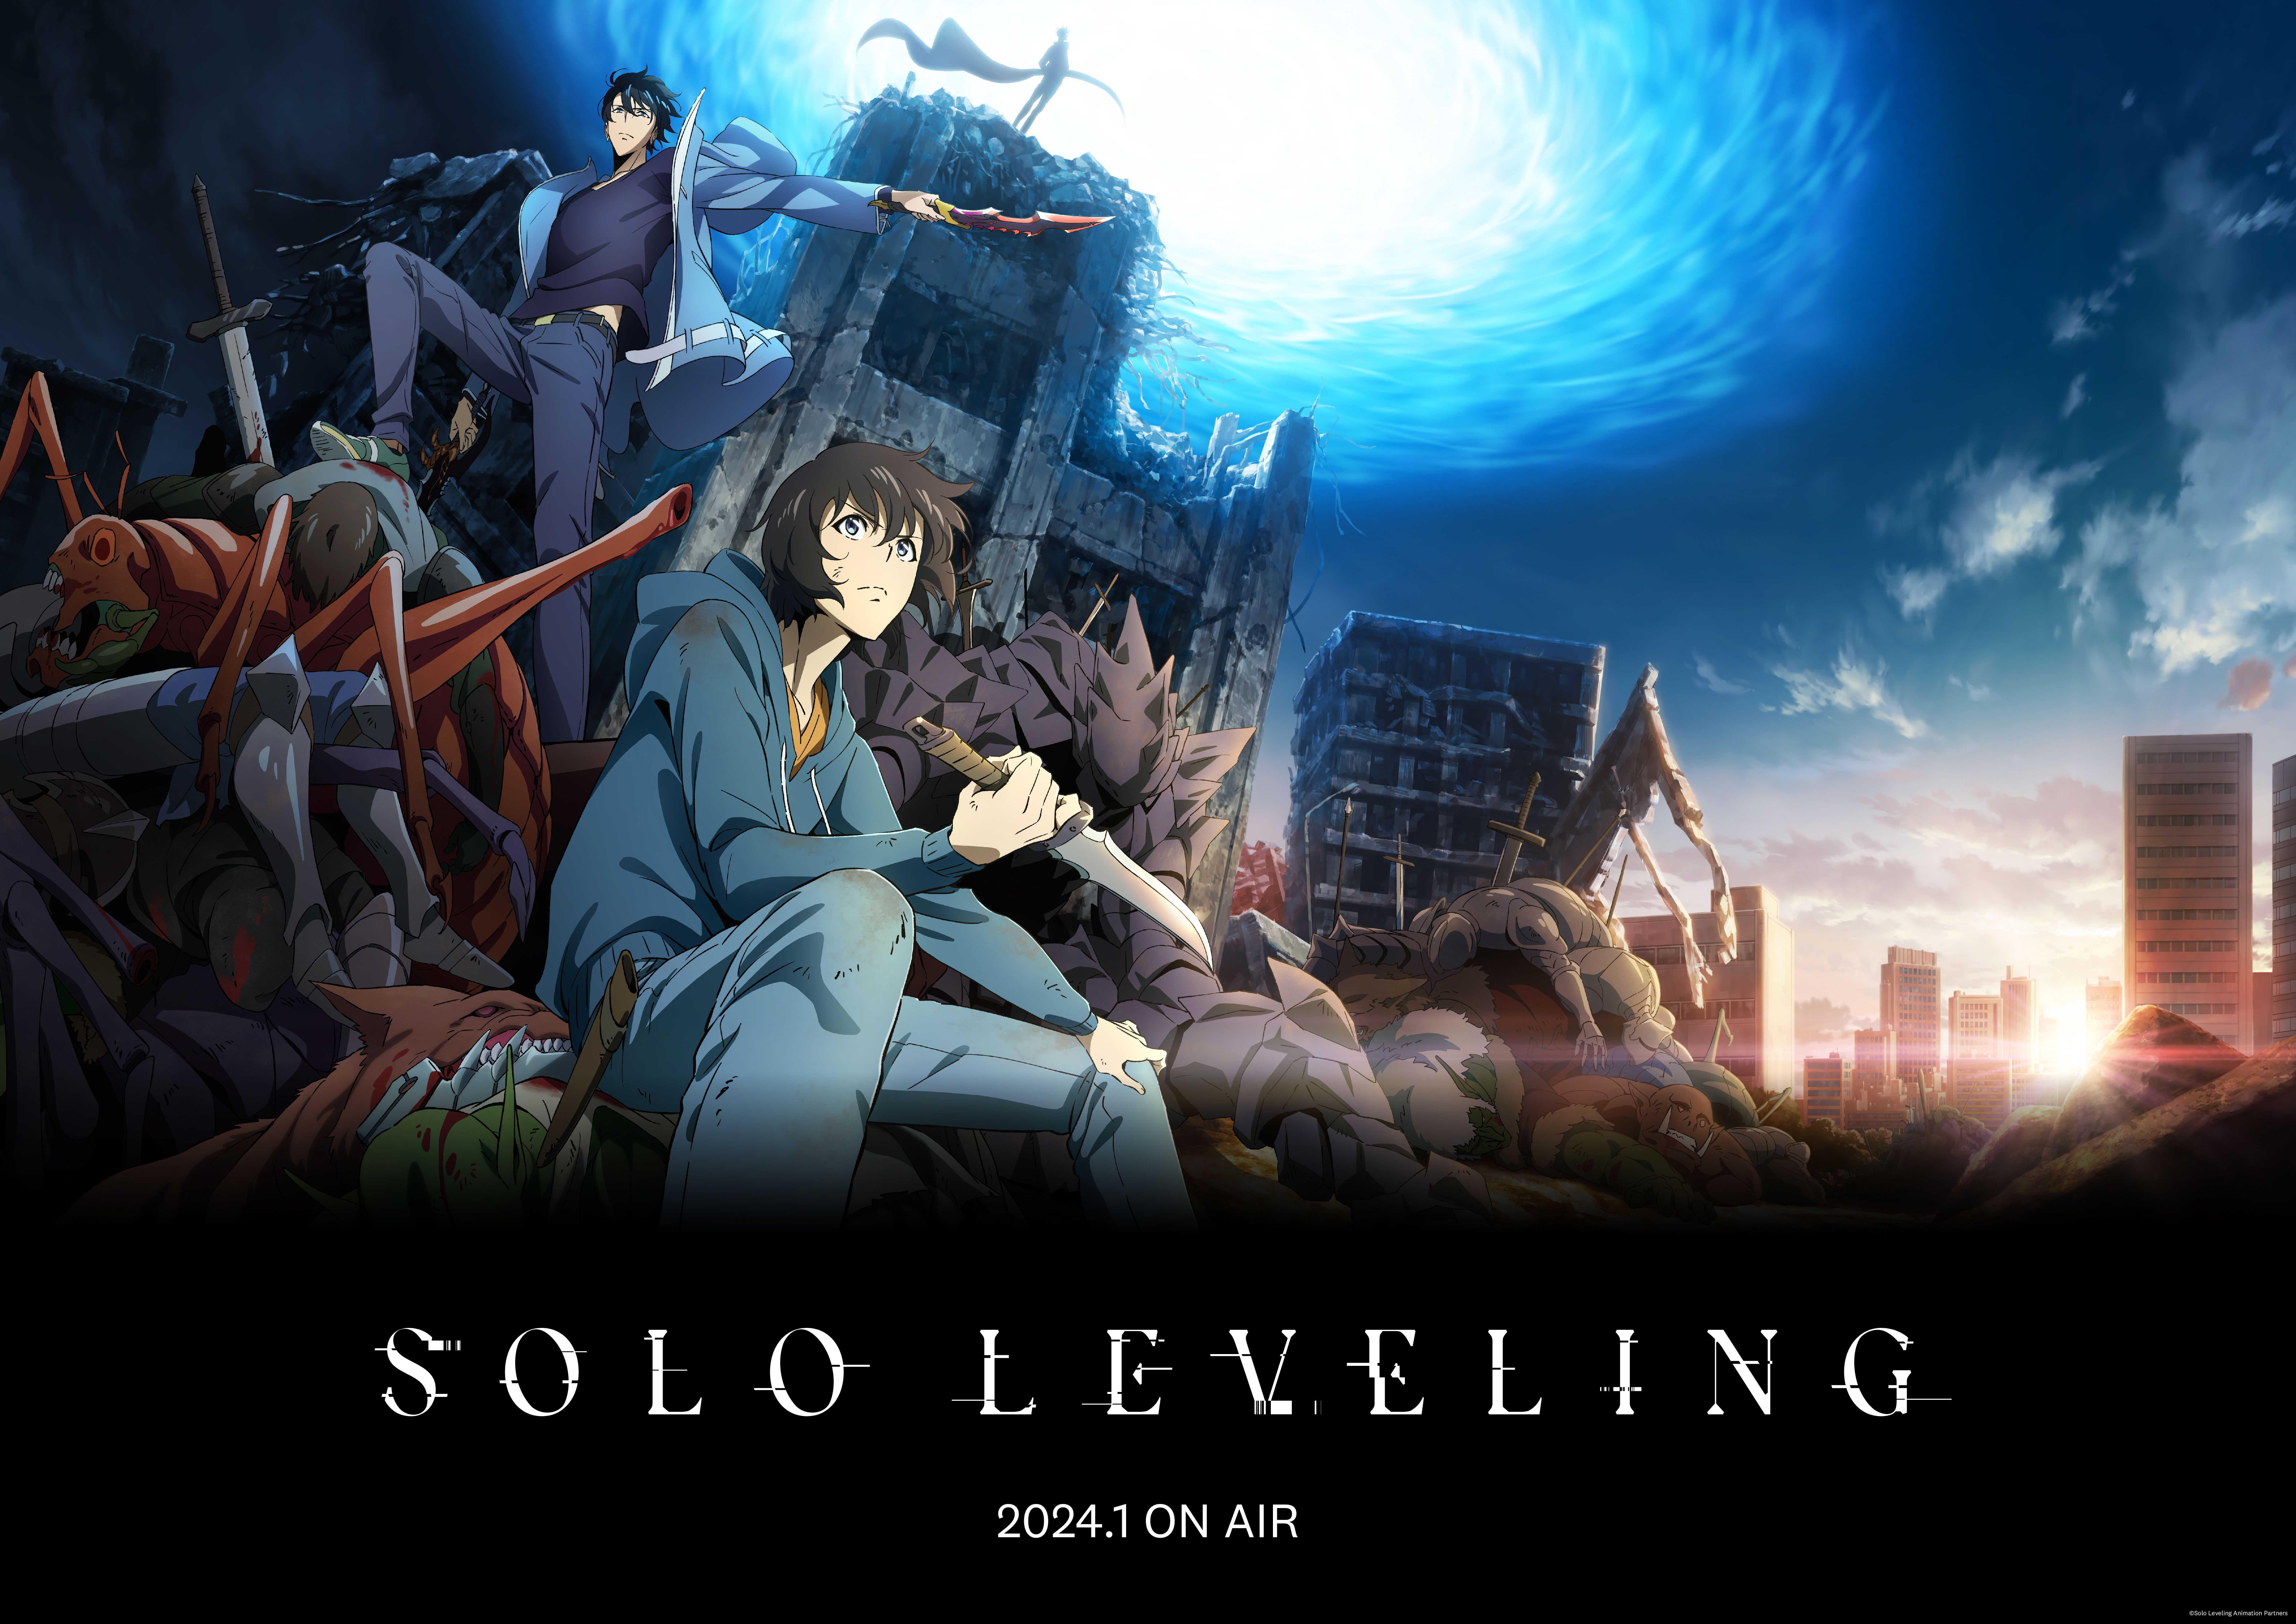 Get Hyped Dub Fans! Solo Leveling English Dub Premieres This Week